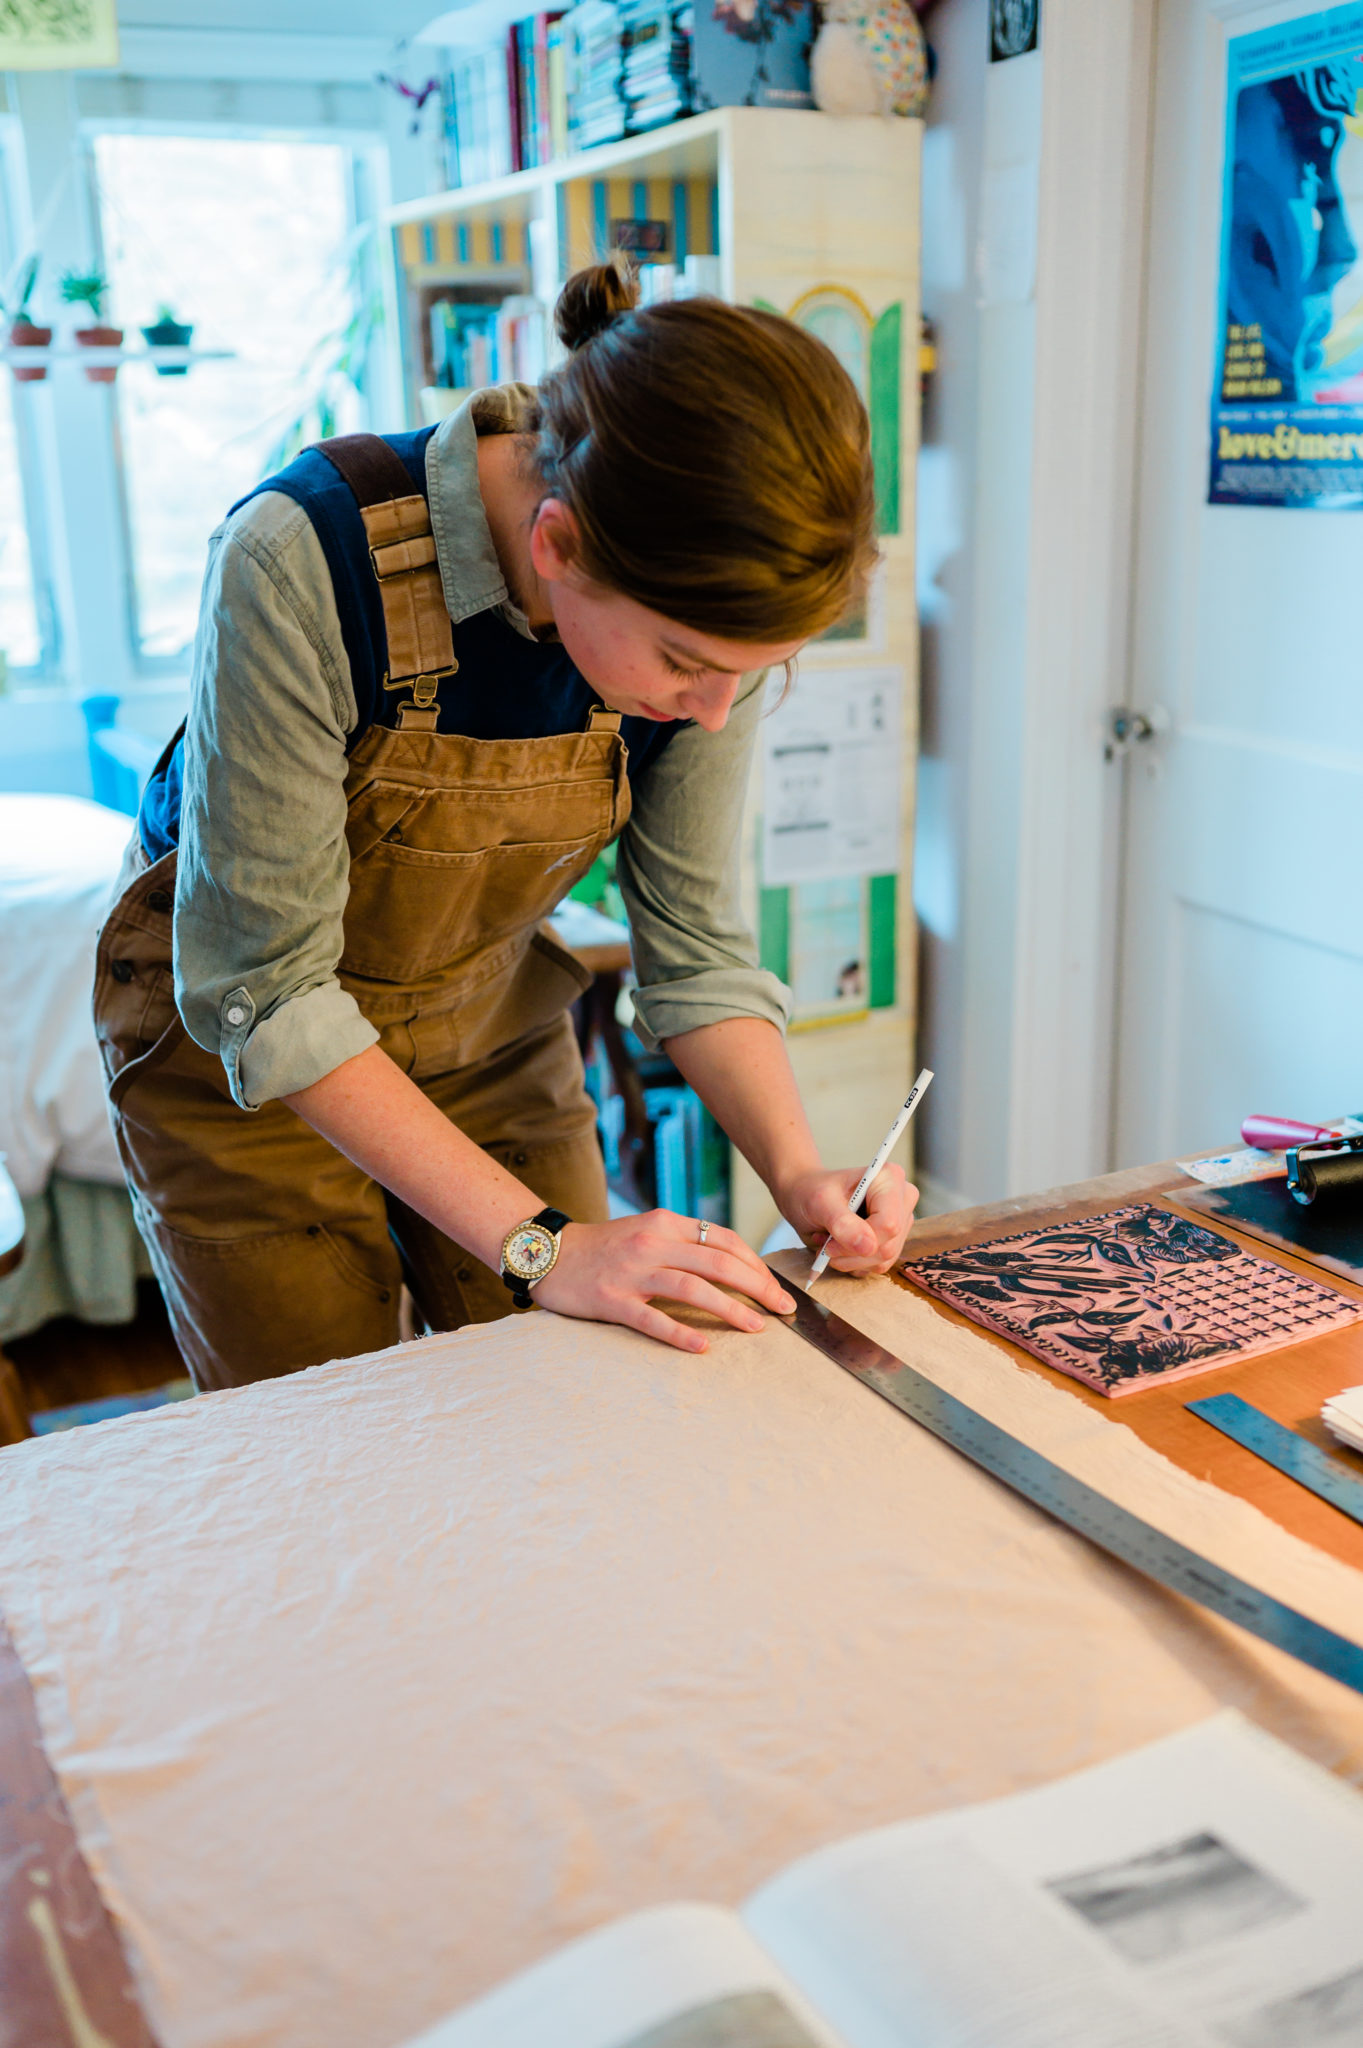 Annabella Boatwright leans over her artist's workbench and measure cloth.